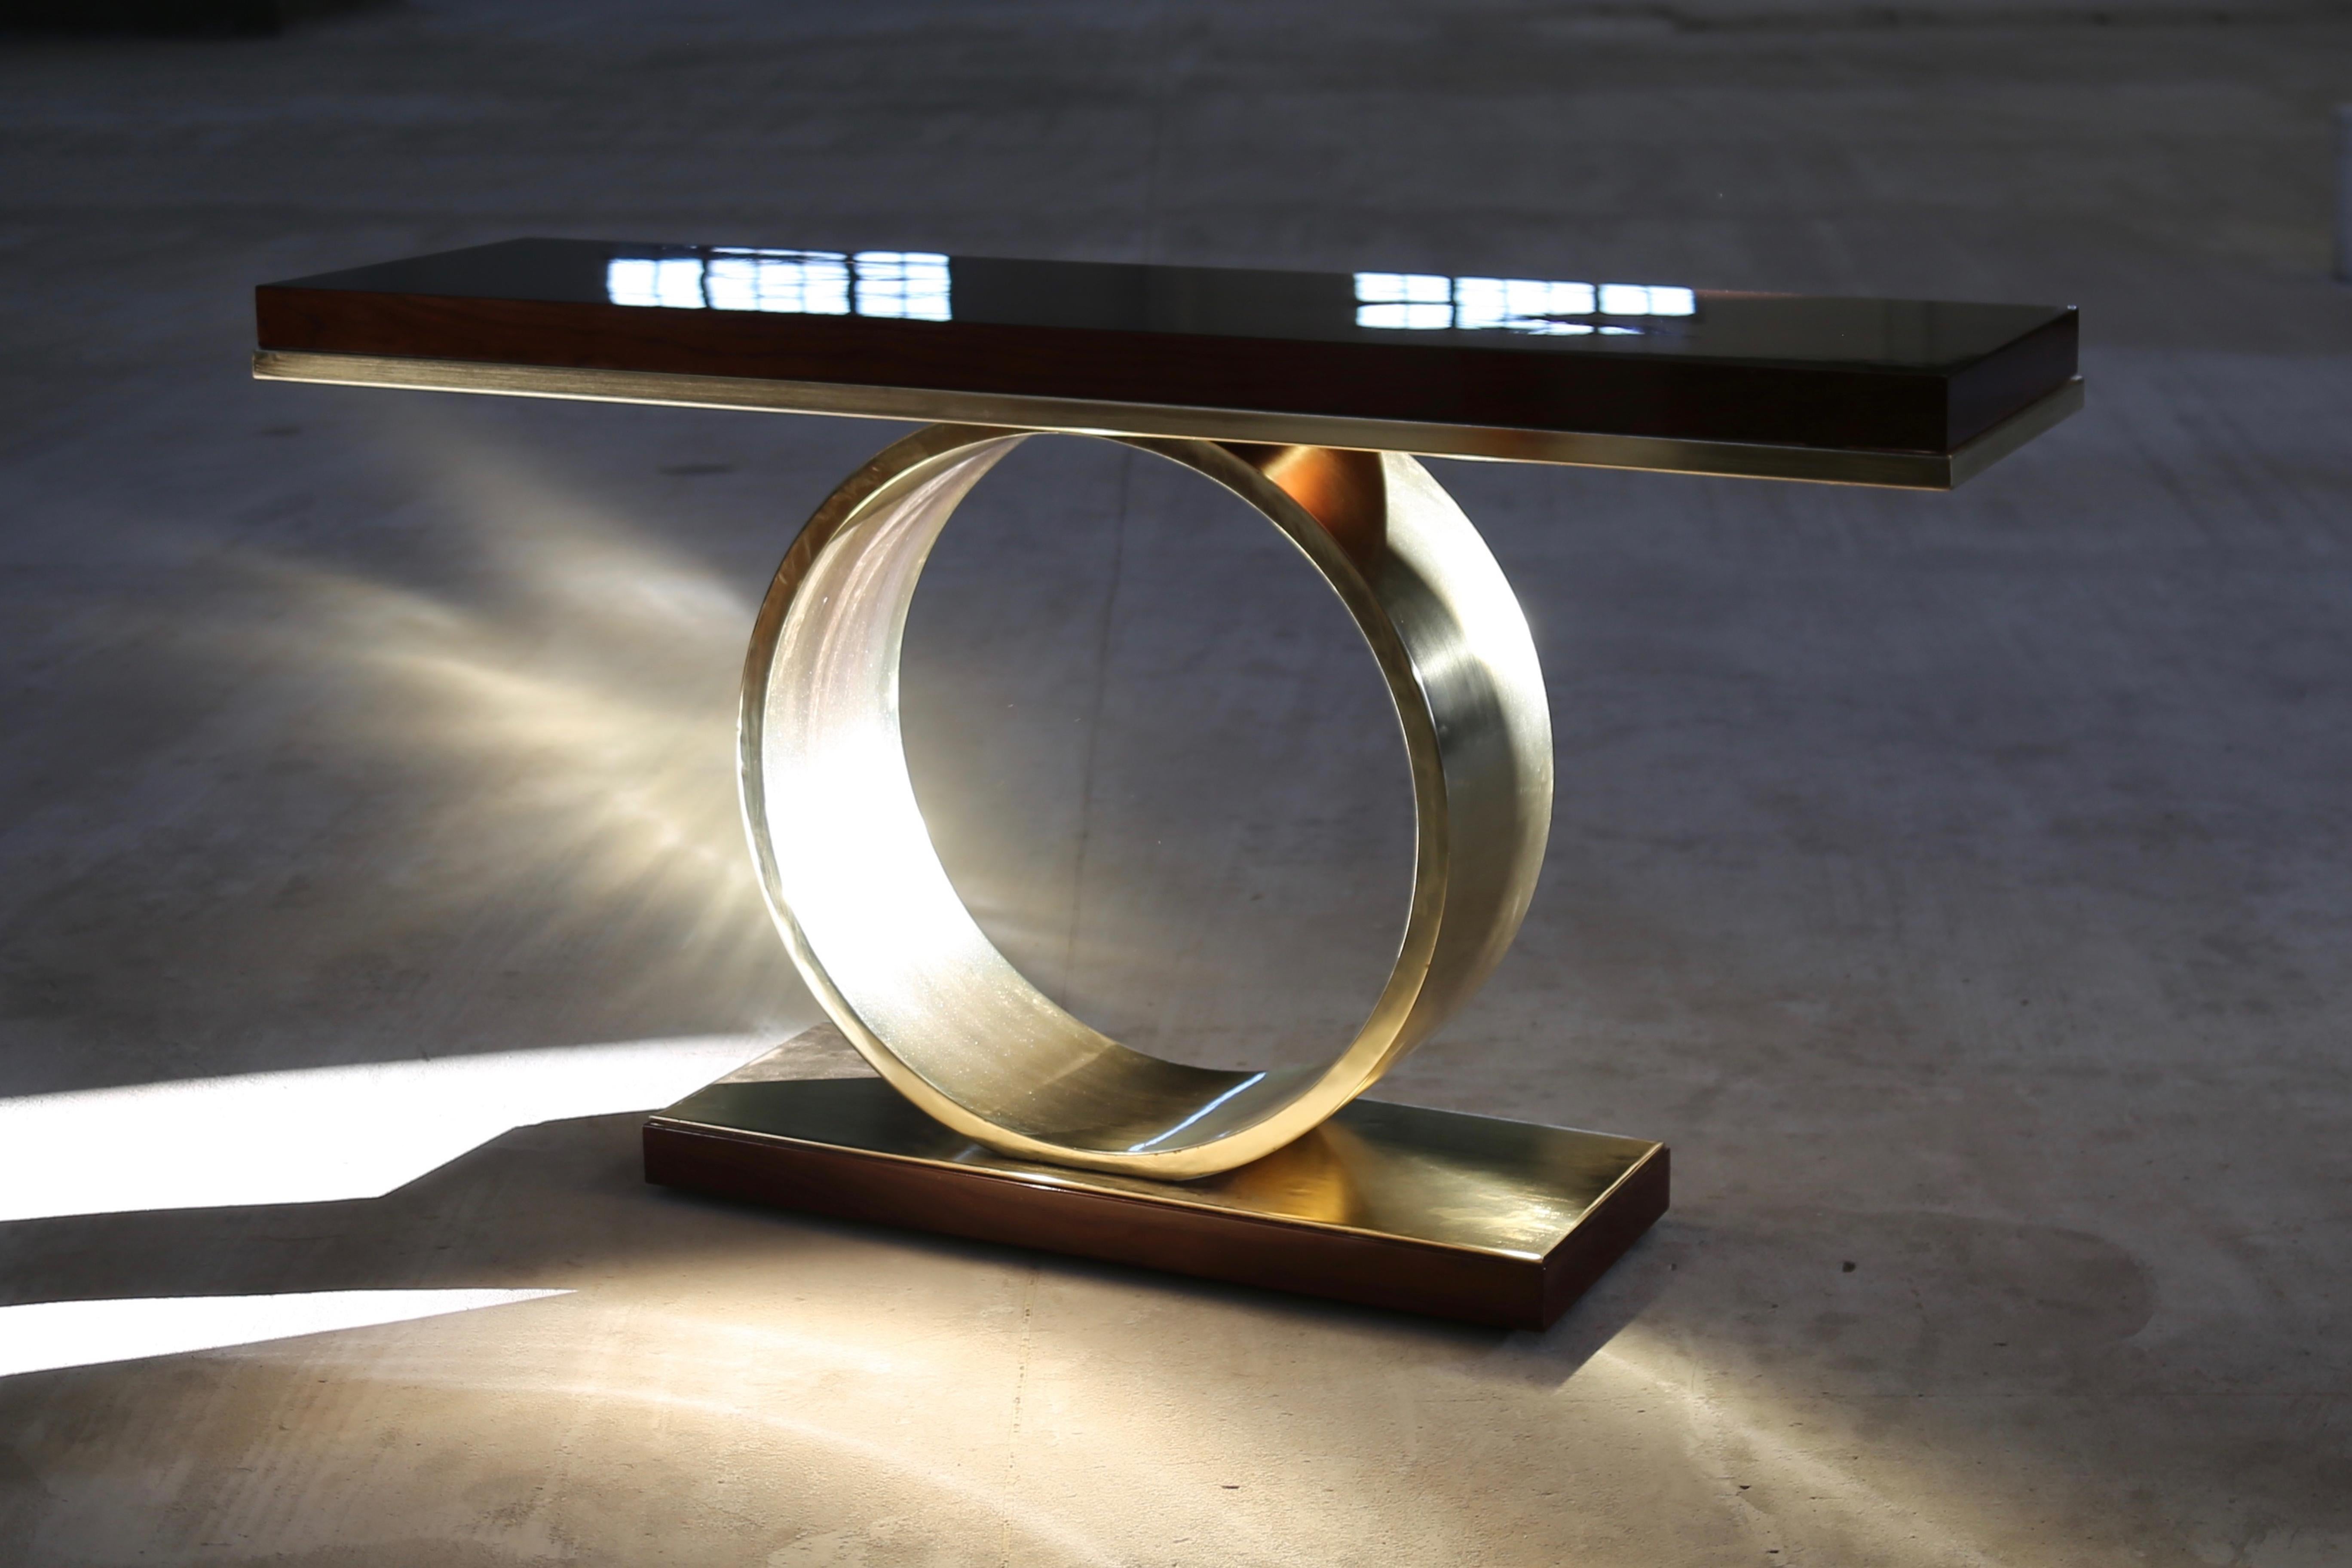 Donte Polished Bronze and Wood Sculptural Console Table.

The Donte console table features a ring-shaped metal base, shown here in polished Bronze, supporting a high gloss wood top. Available in any species, size, or finish.